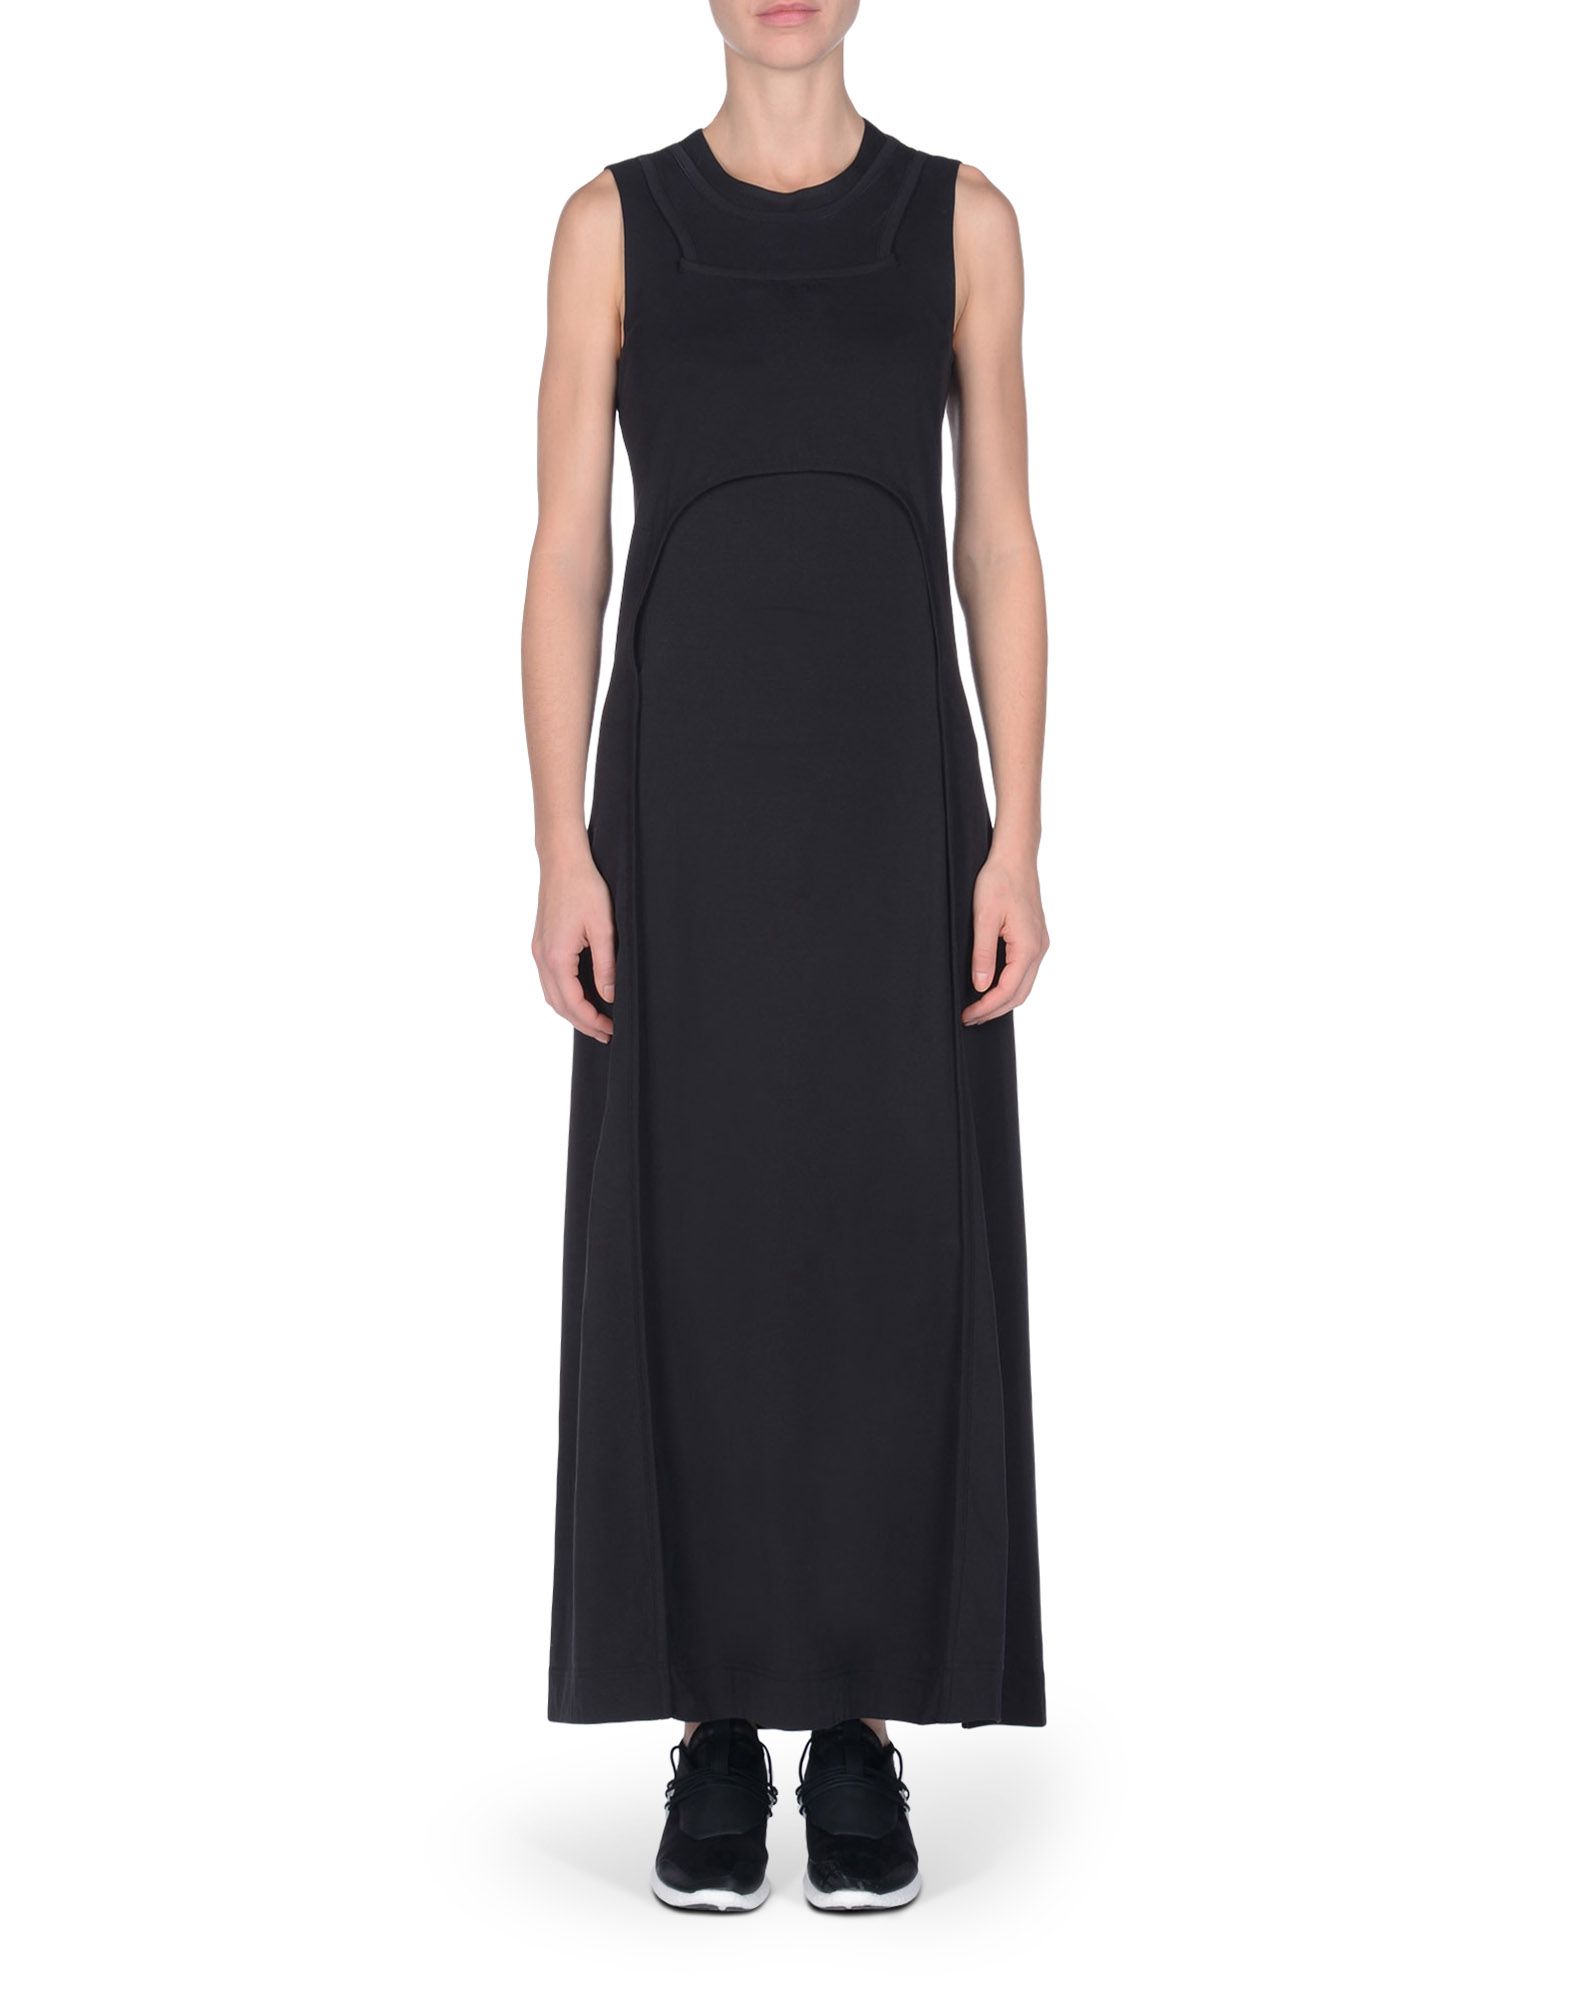 Y 3 JERSEY DRESS for Women | Adidas Y-3 Official Store